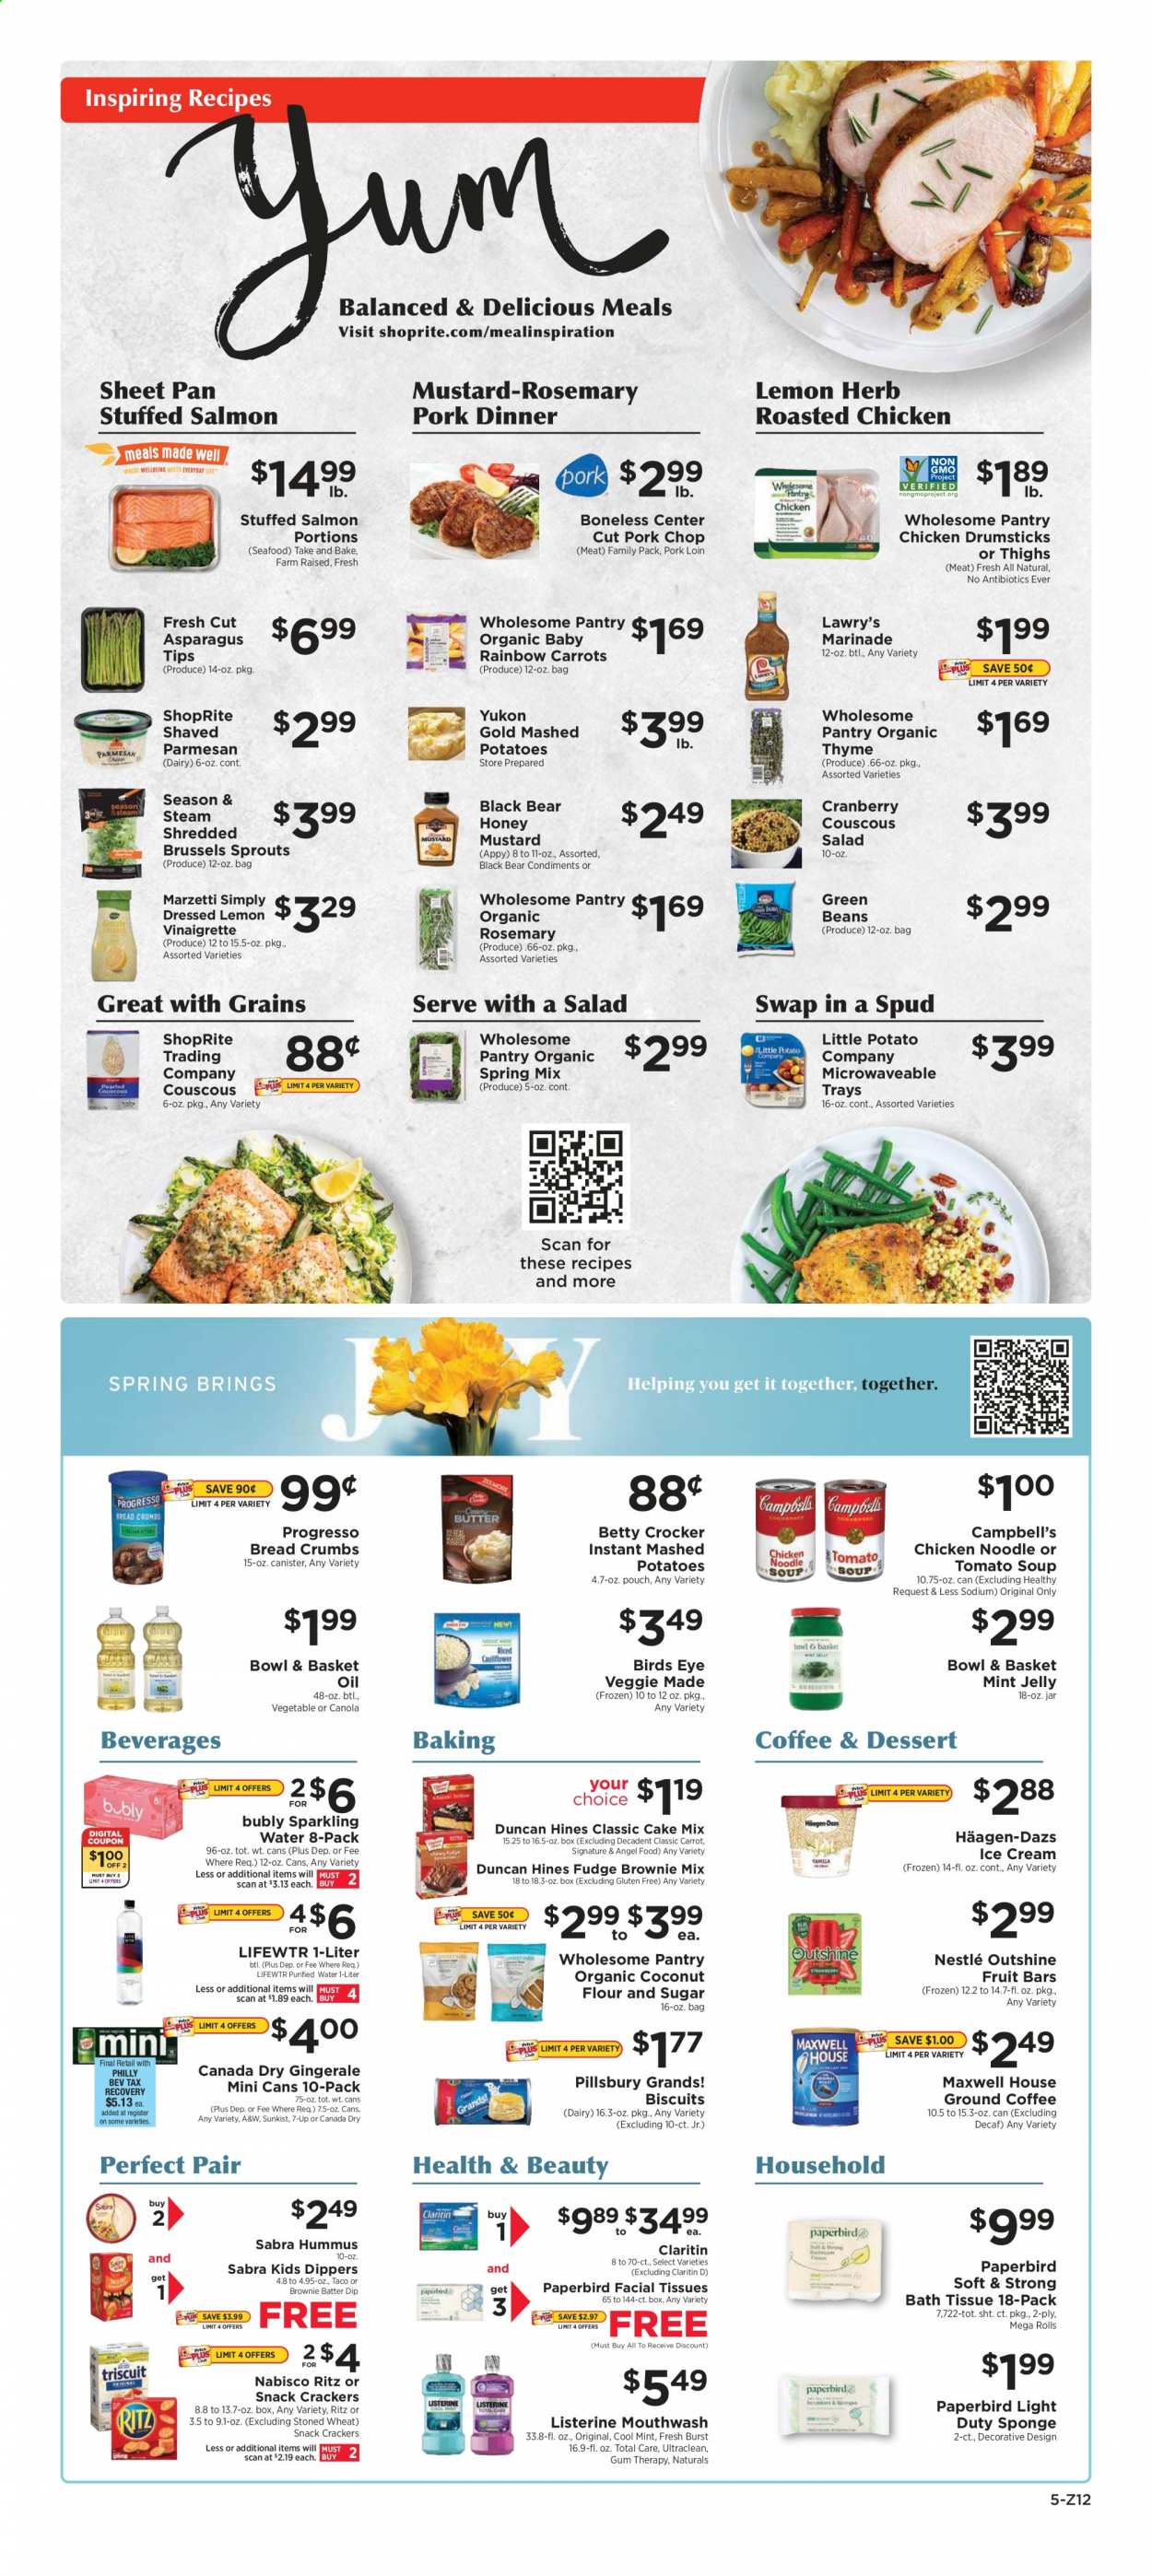 thumbnail - ShopRite Flyer - 03/28/2021 - 04/03/2021 - Sales products - bread, brownie mix, cake mix, Angel Food, breadcrumbs, beans, carrots, brussel sprouts, coconut, salmon, seafood, Campbell's, mashed potatoes, tomato soup, soup, salad, Pillsbury, Bird's Eye, Progresso, Bowl & Basket, stuffed chicken, hummus, parmesan, jelly, butter, dip, ice cream, Häagen-Dazs, green beans, fudge, Nestlé, crackers, biscuit, RITZ, snack, coconut flour, flour, organic coconut flour, couscous, noodles, rosemary, marinade, herbs, mint jelly, mustard, vinaigrette dressing, honey mustard, oil, Canada Dry, 7UP, A&W, purified water, Lifewtr, Maxwell House, coffee, ground coffee, chicken drumsticks, pork chops, pork loin, pork meat, bath tissue, Listerine, mouthwash, facial tissues, sponge, pan, bowl, sheet pan, asparagus, potatoes. Page 5.